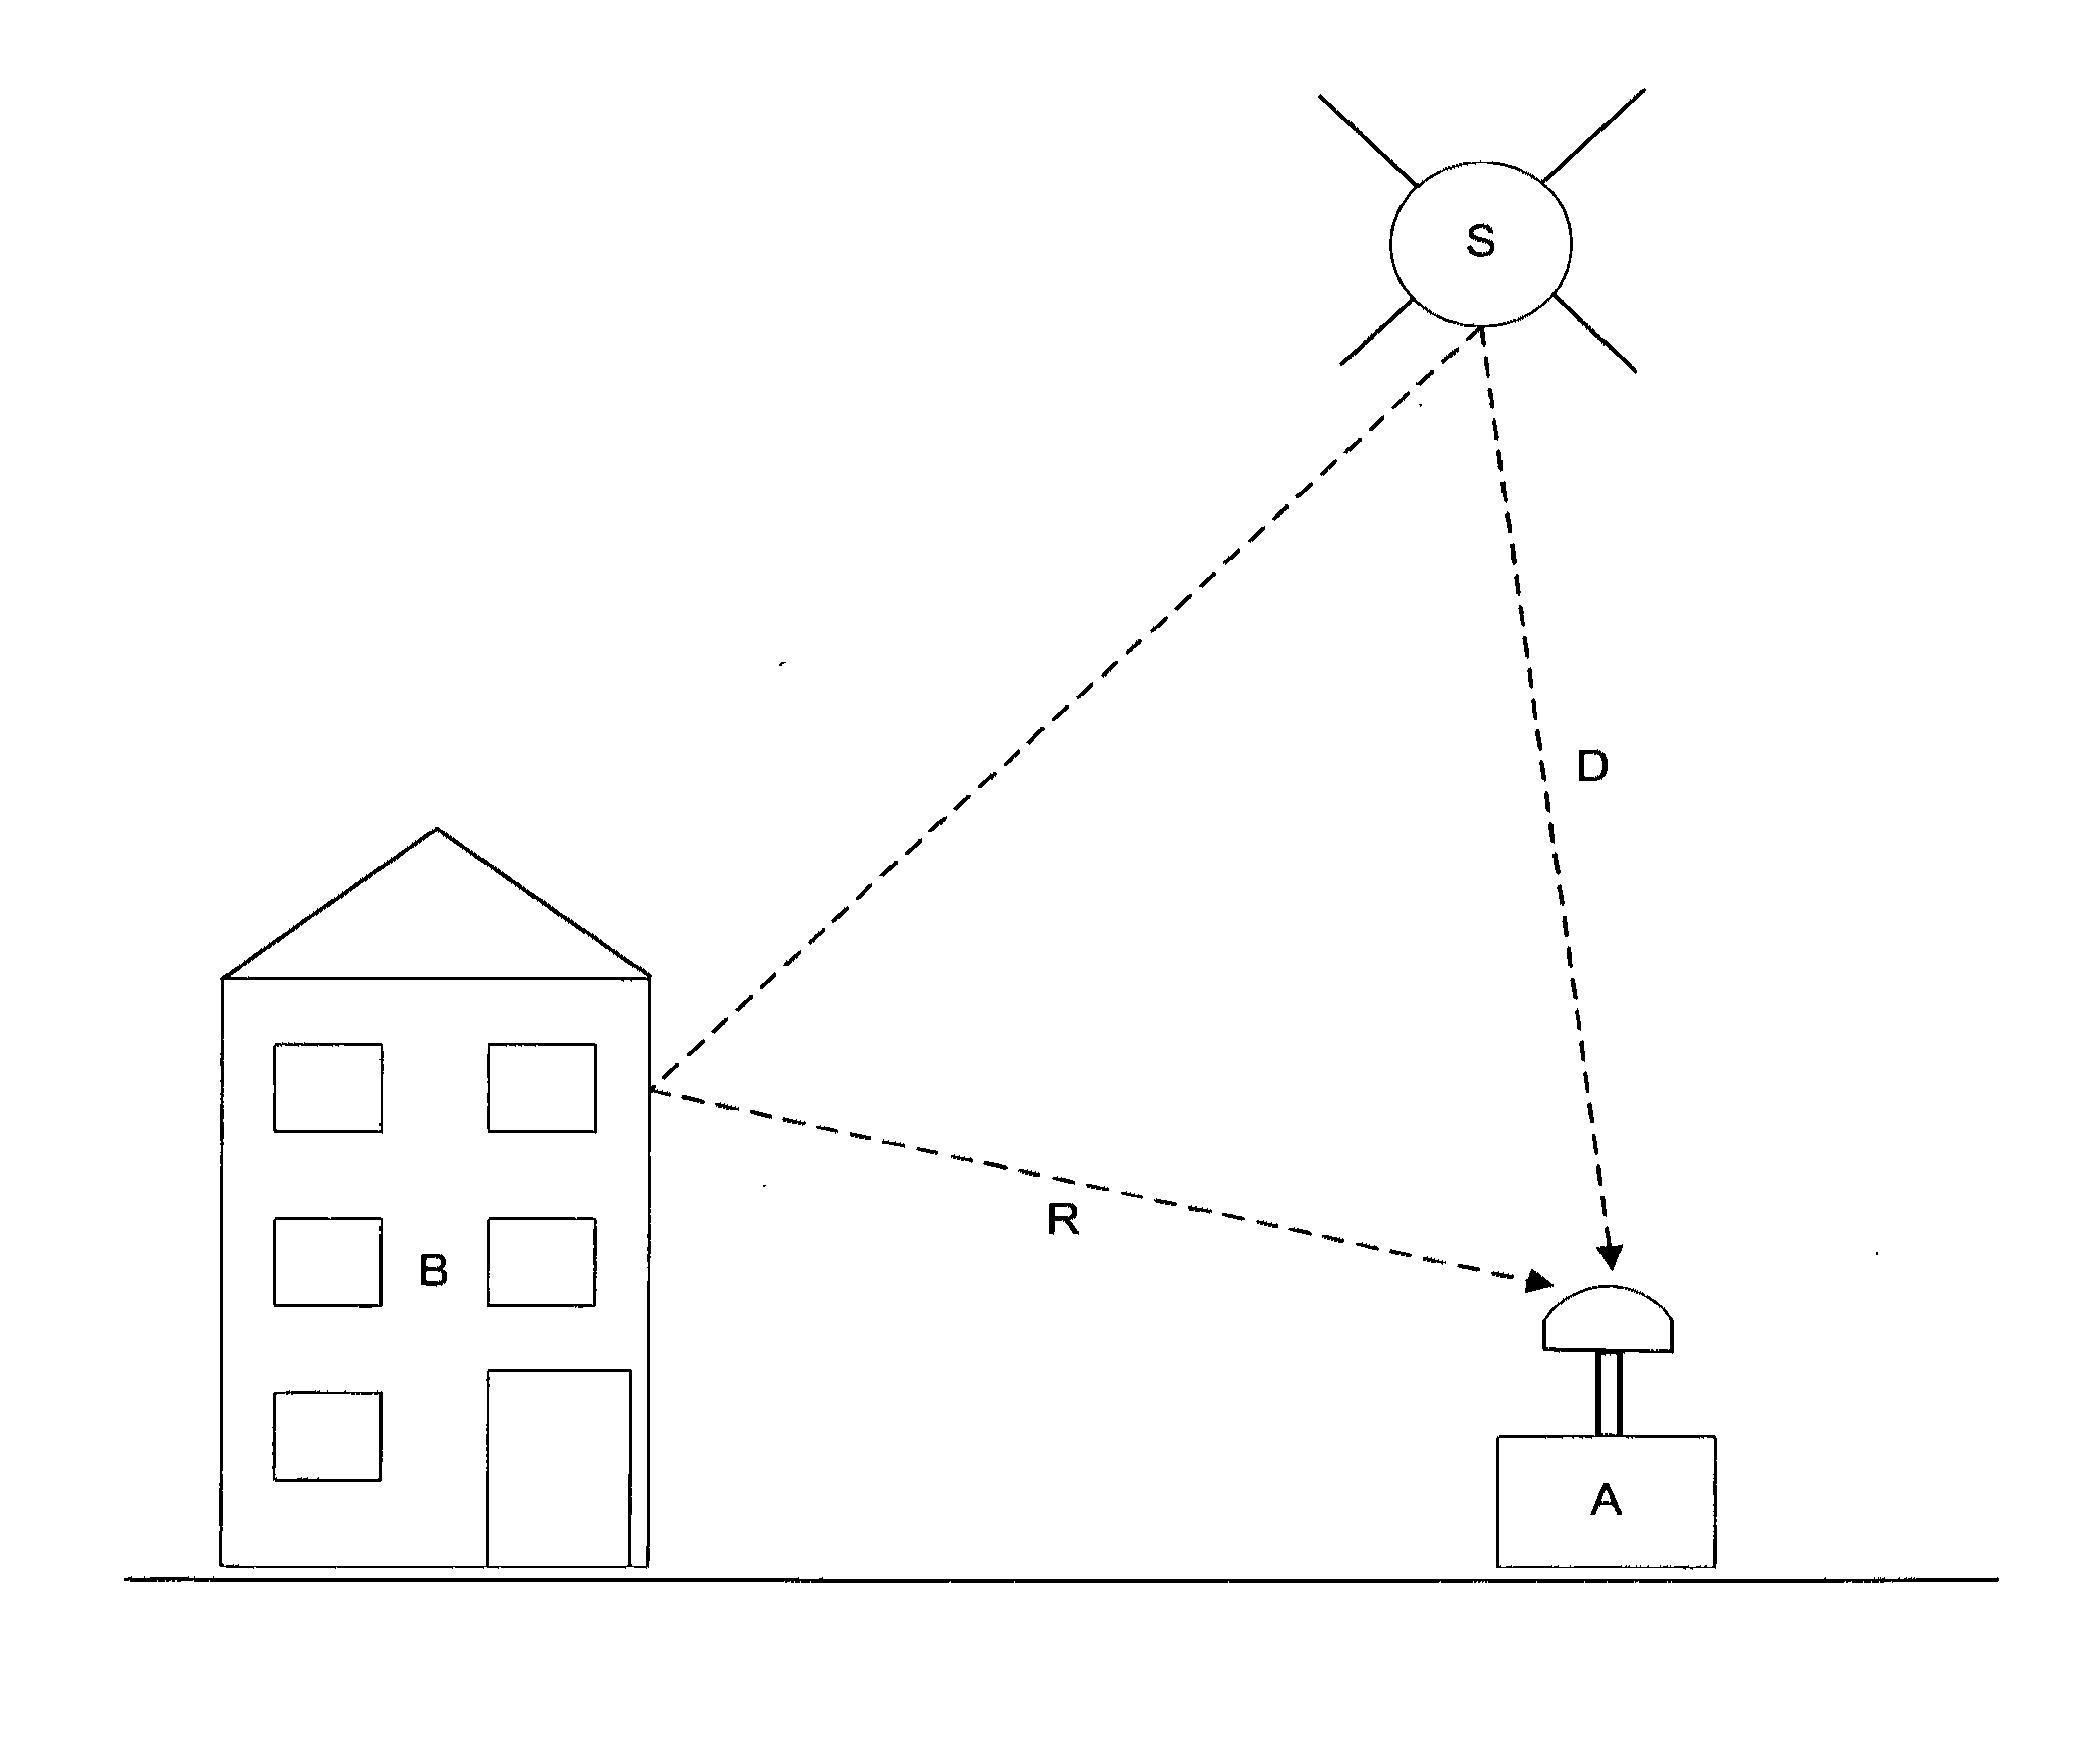 Global navigation satellite antenna systems and methods